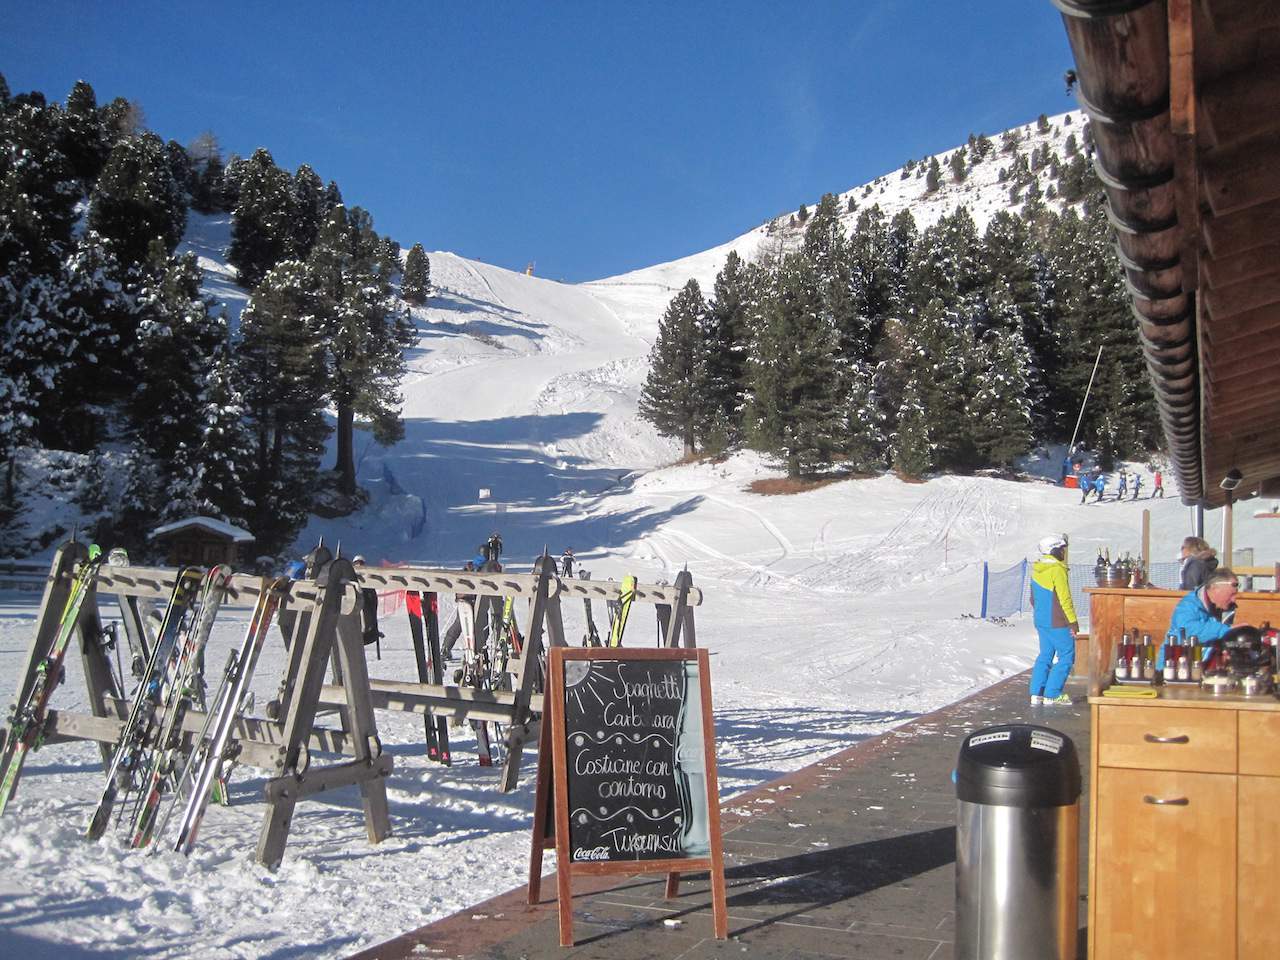 Empty slopes and après-ski...what more can you ask for?